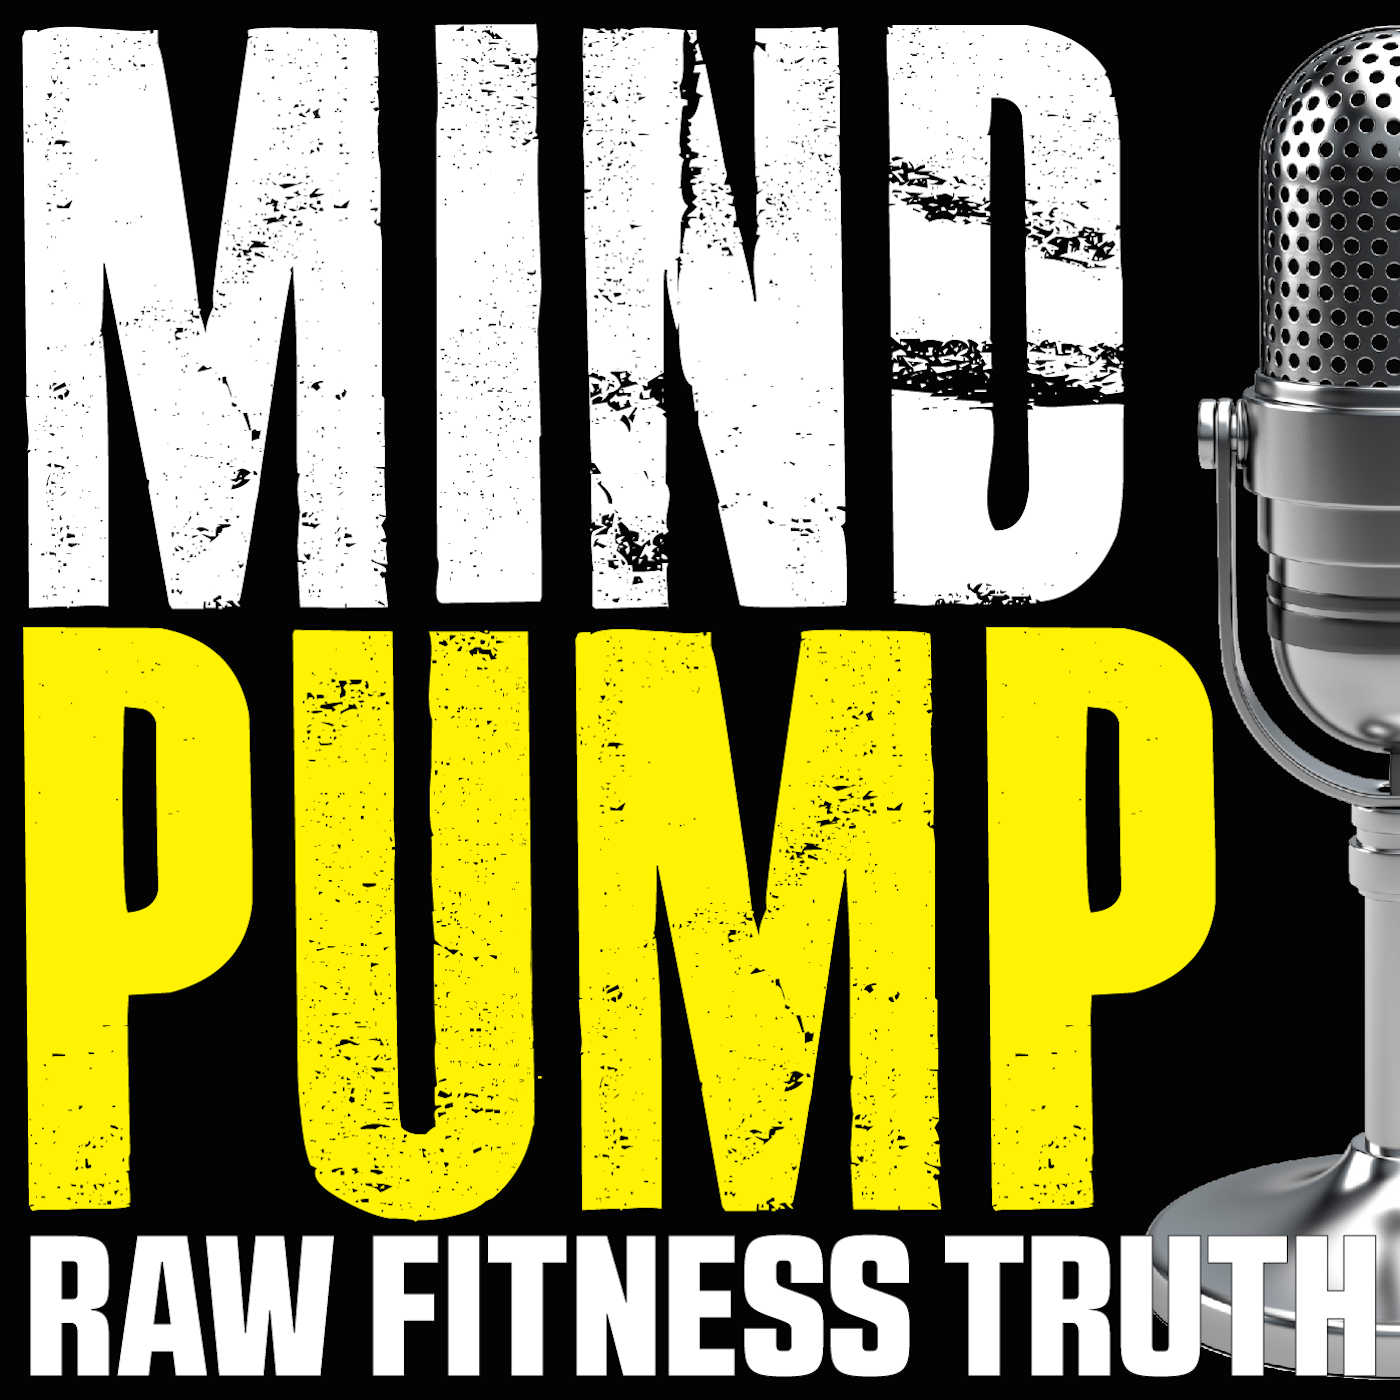 391: Use Stress to Build Muscle & Lose Fat